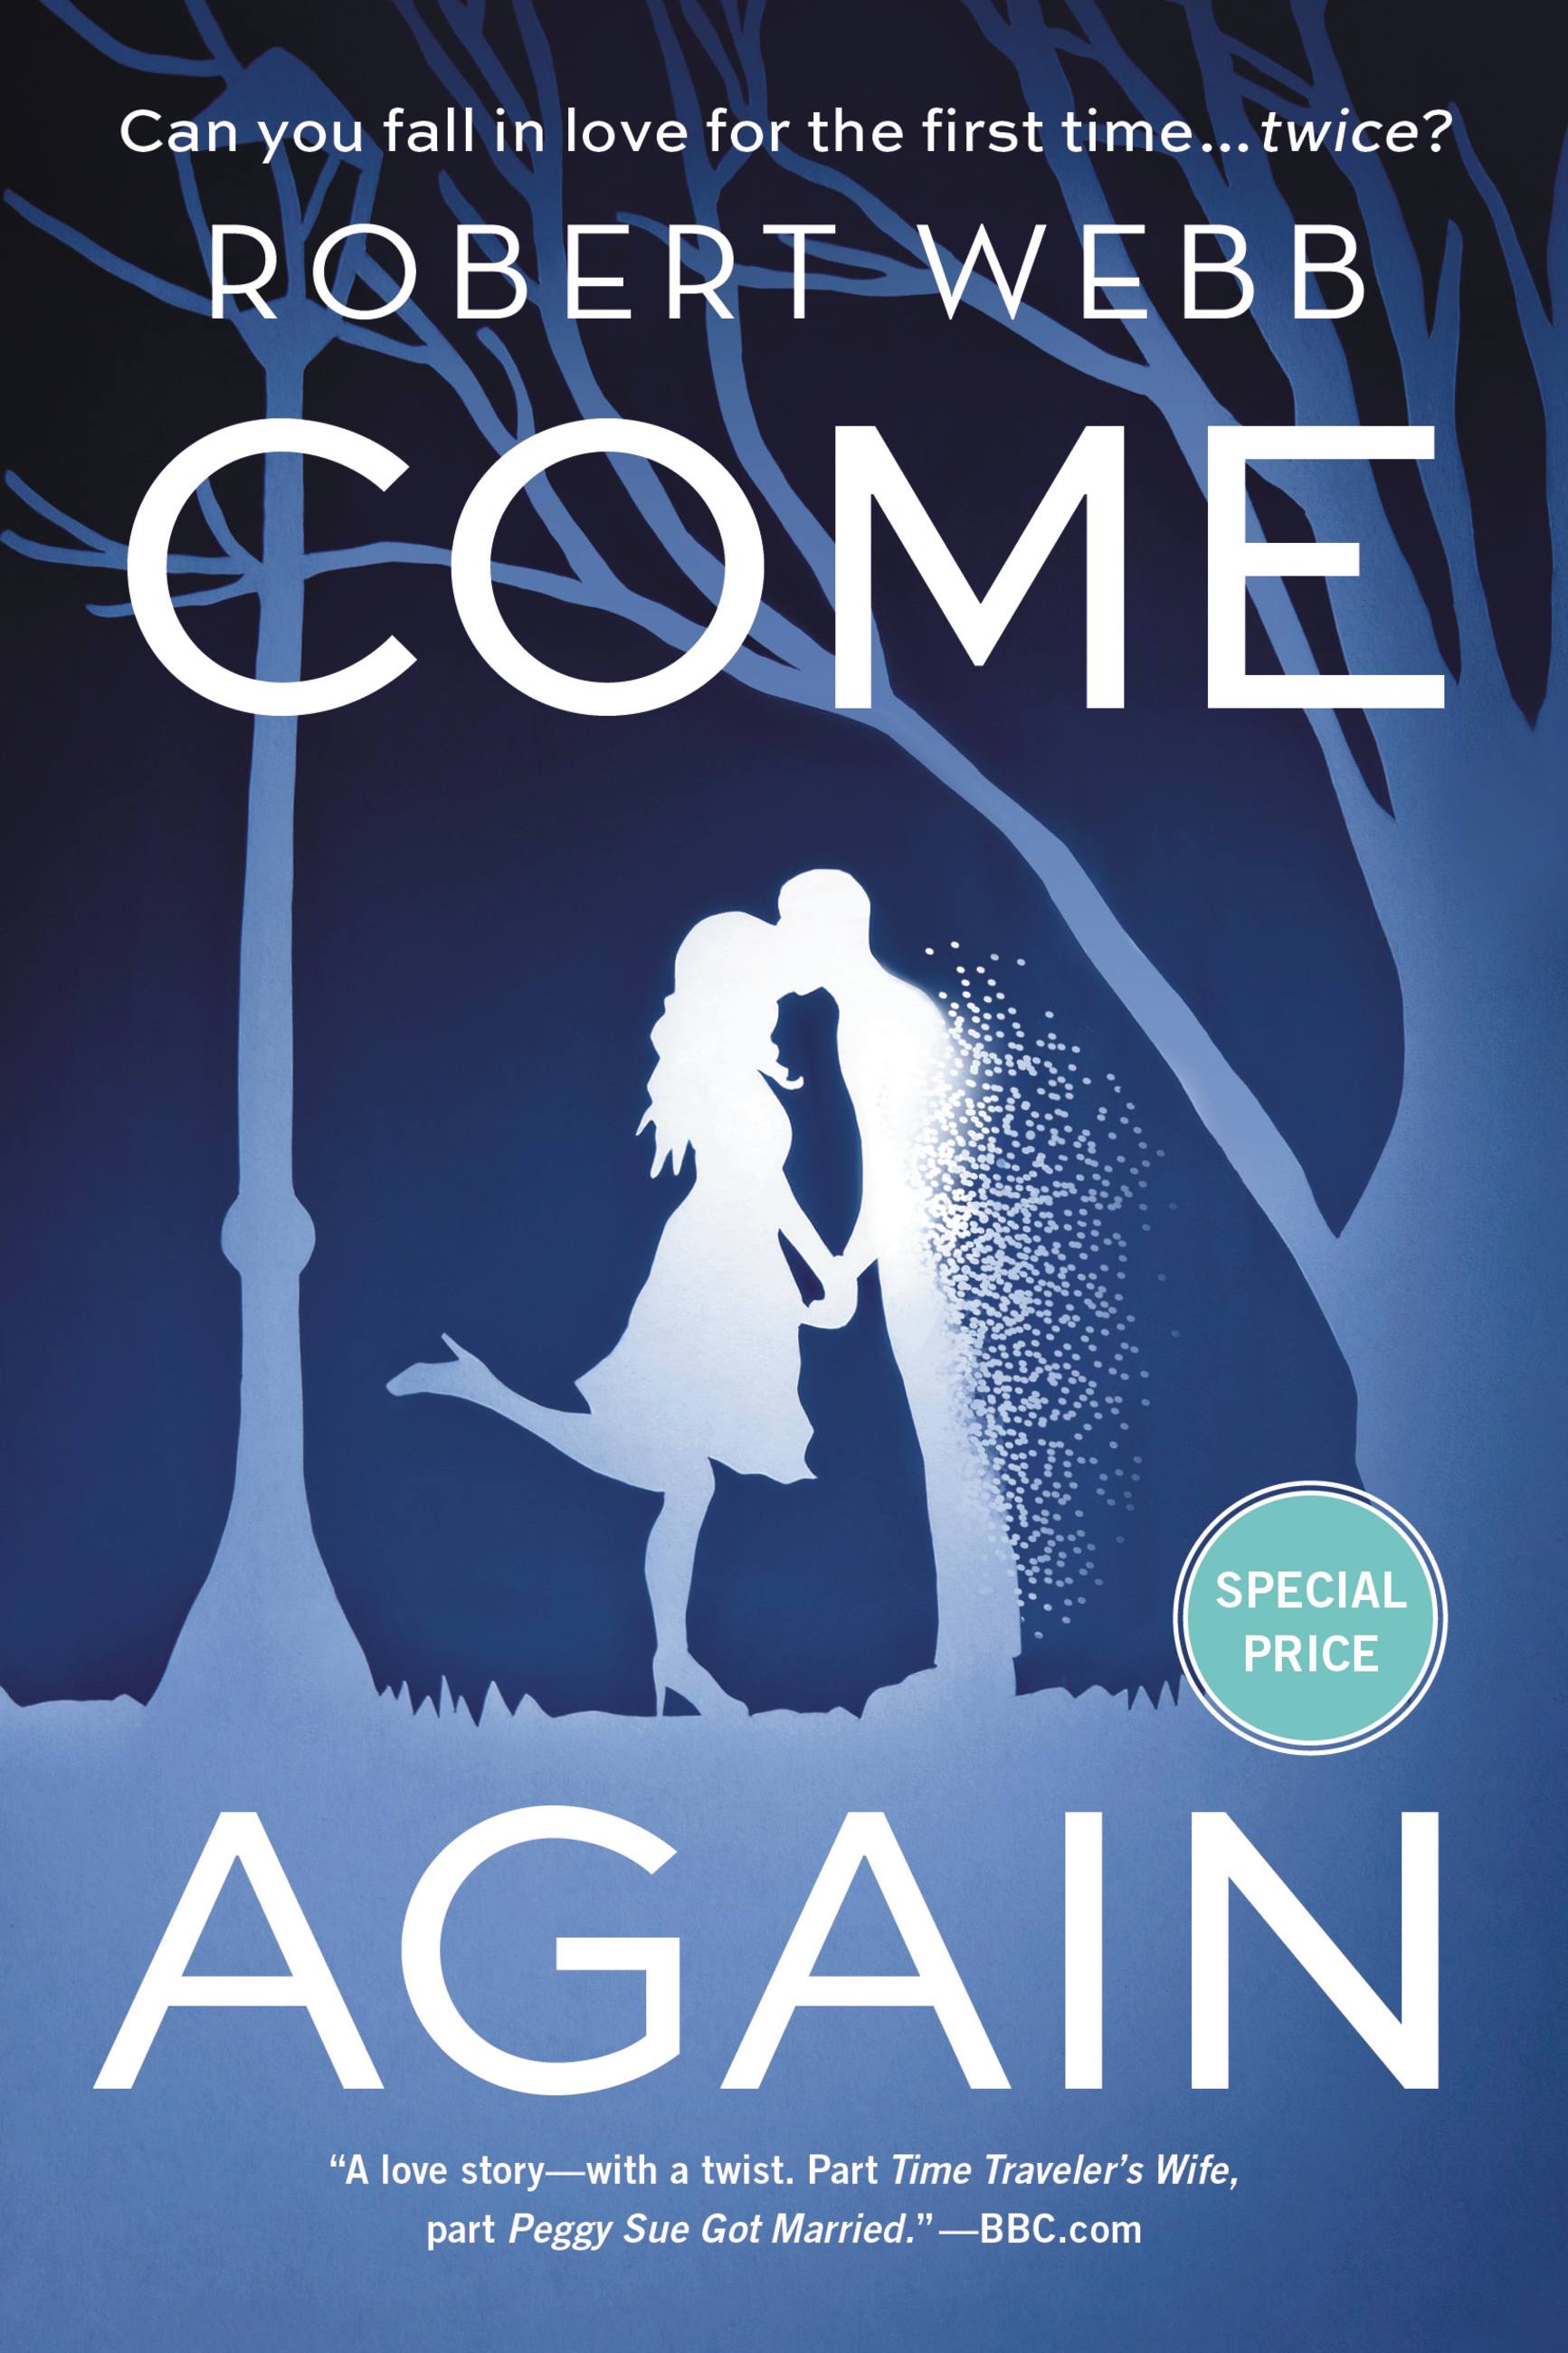 Come Again by Robert Webb Hachette Book Group